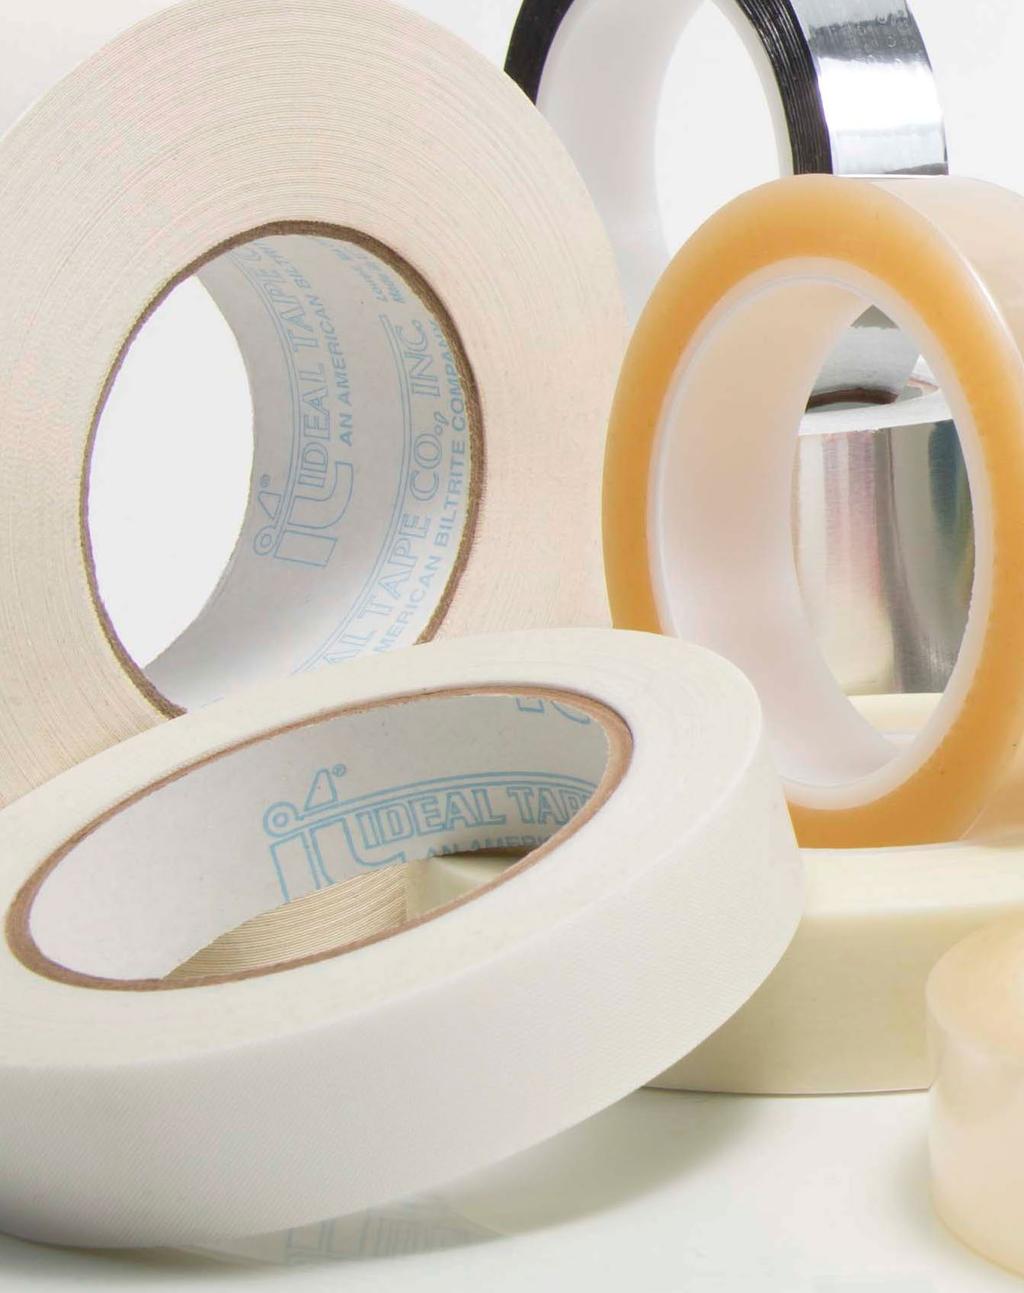 ELECTRICAL INSULATION TAPES - UL FILE NO. E-82910 POLYESTER Dielectric Breakdown (Volts) Tensile Strength (n/25.4 mm) IT-7017 Clear 5,000 23.0 (101.0) 100% Tough, conformable and thin.